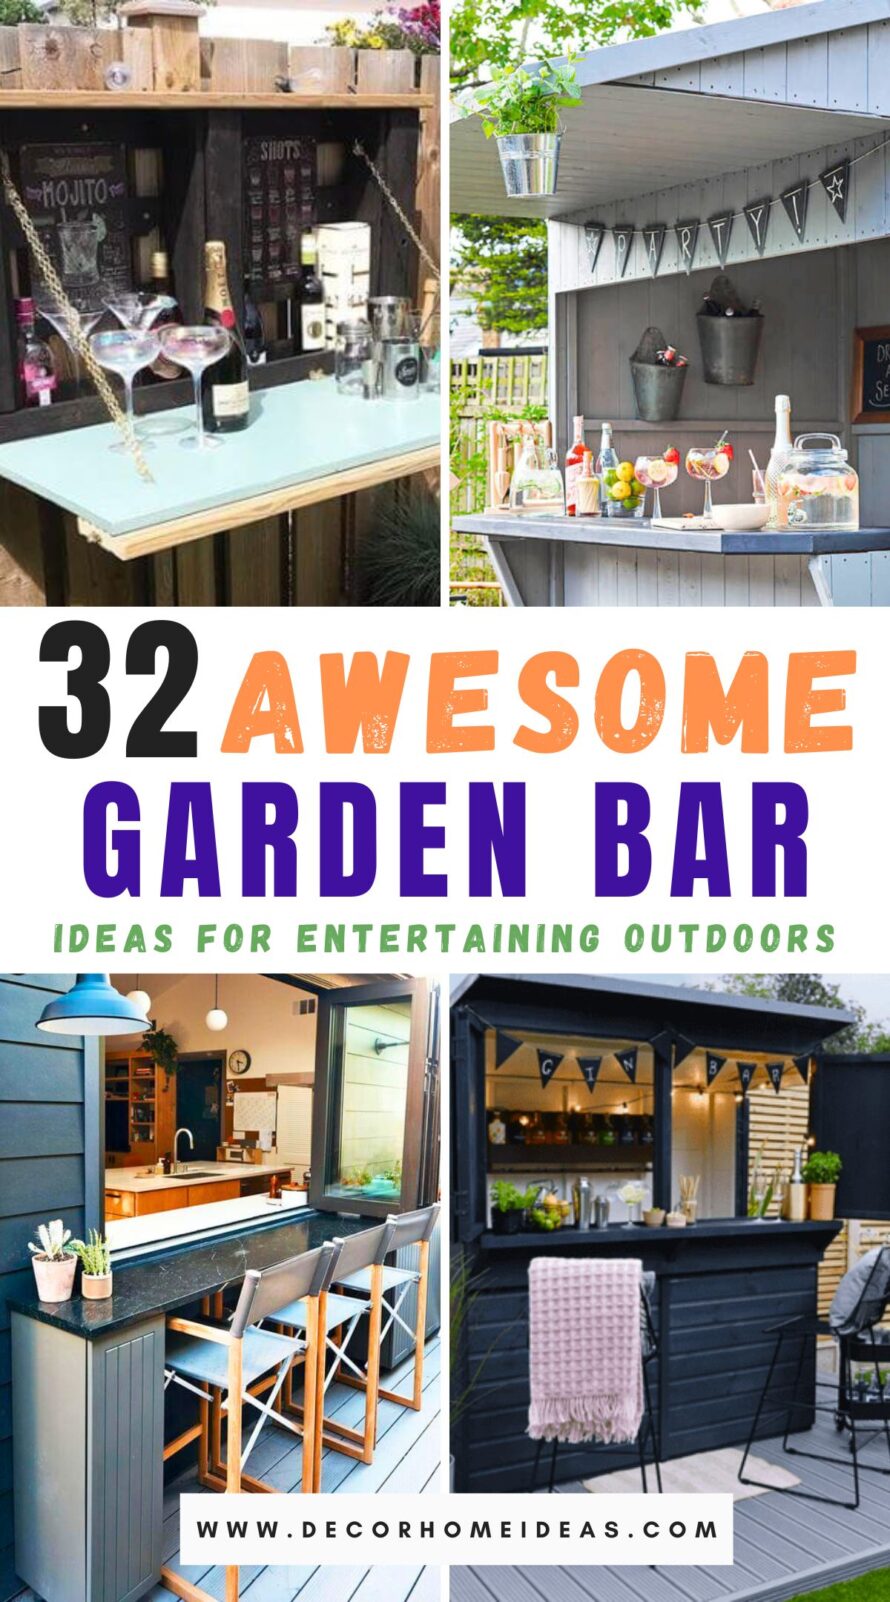 Discover 32 awesome garden bar ideas to elevate your outdoor entertaining. From rustic DIY pallet bars to sleek built-in designs, these creative concepts provide inspiration for creating the perfect al fresco gathering space in your backyard.